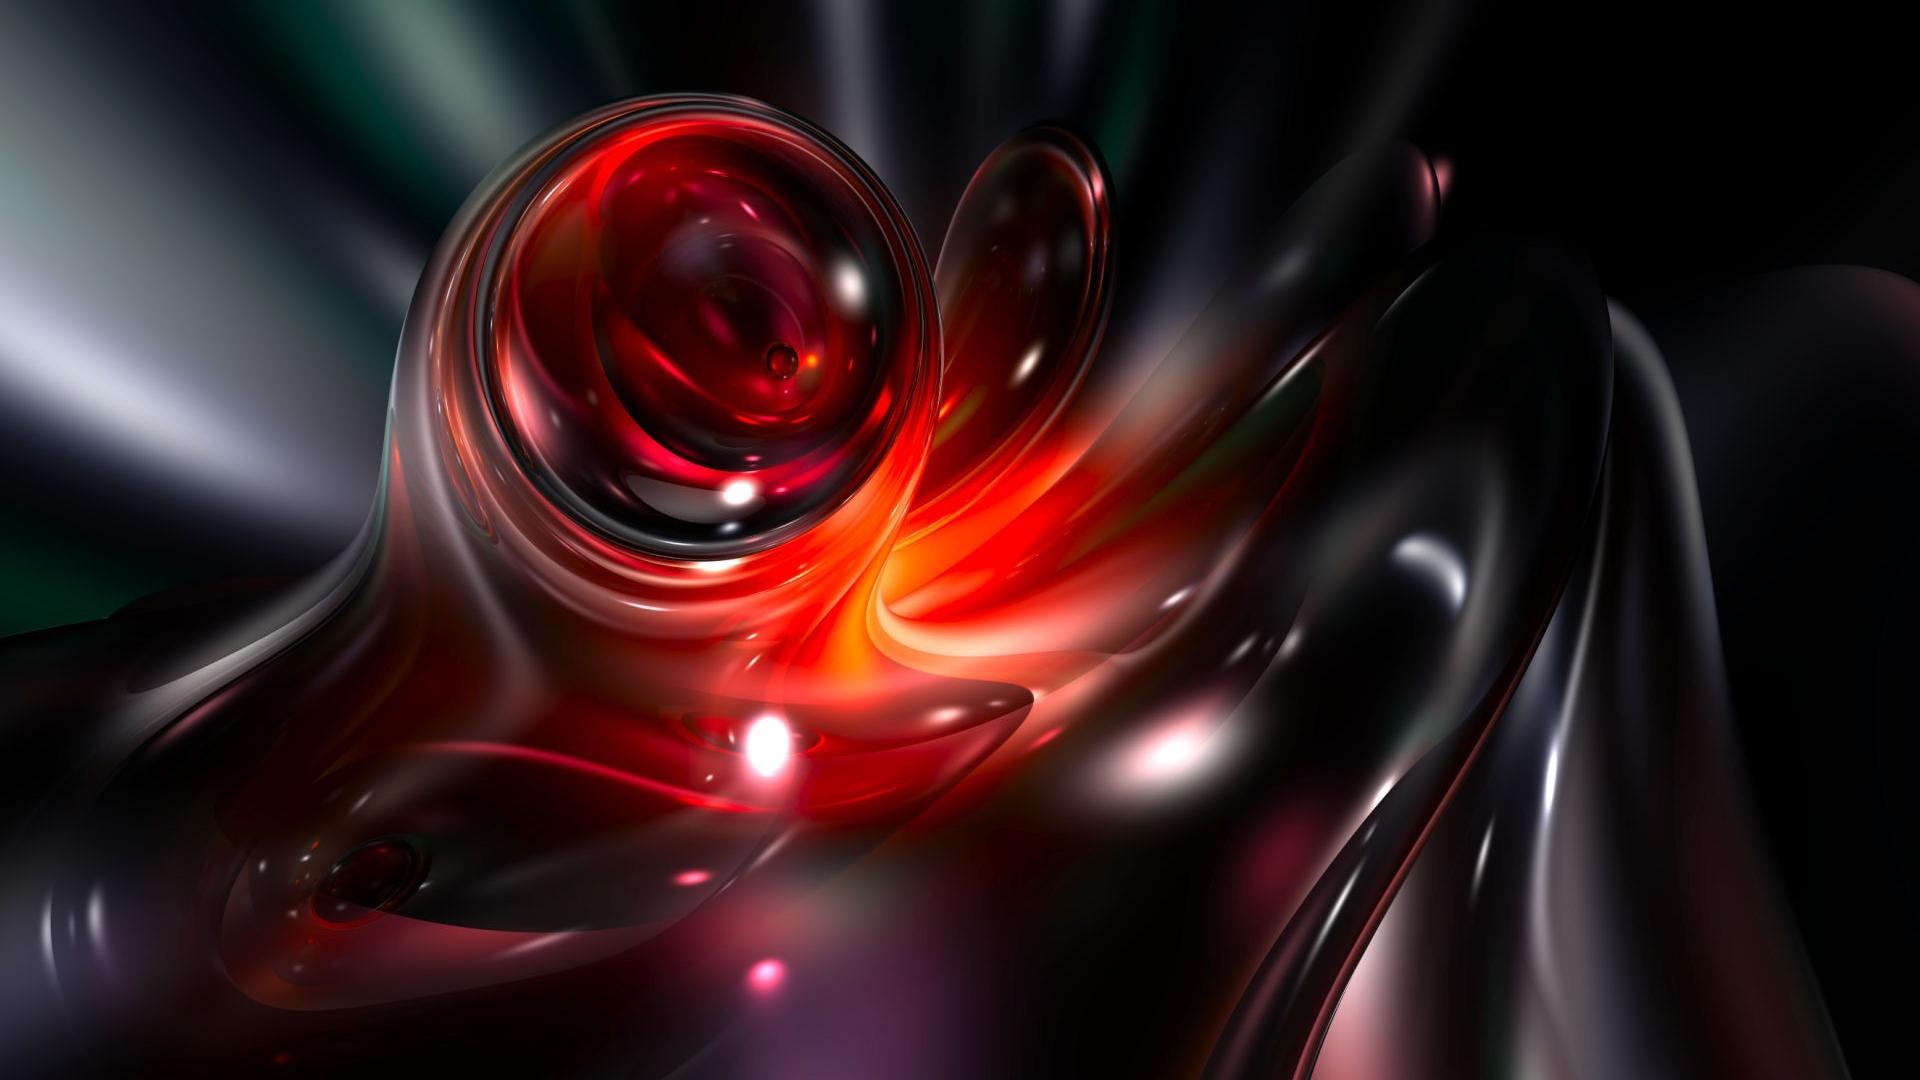 Image Awesome Abstract Wallpaper Pc Android